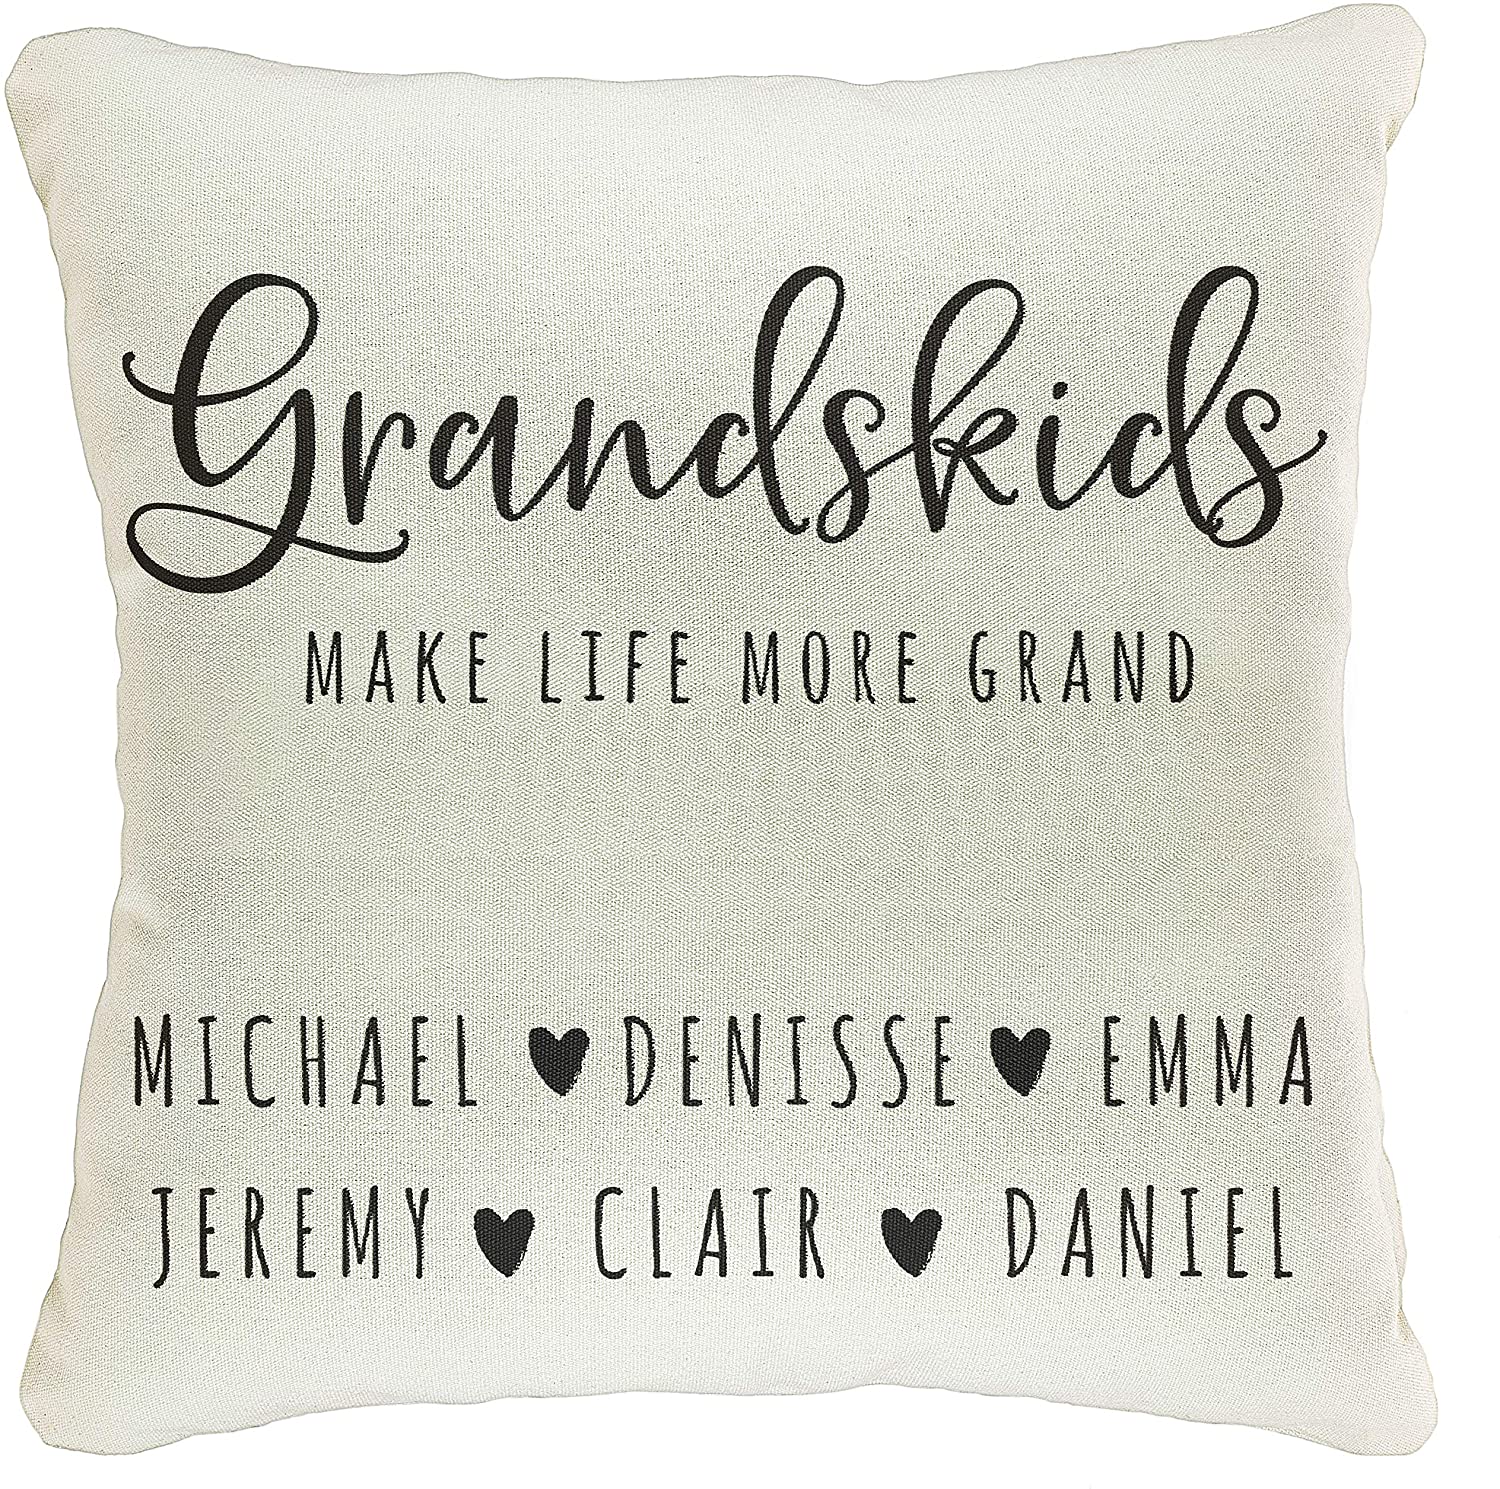 Zexpa Apparel Personalized Cotton Pillow Covers Gift